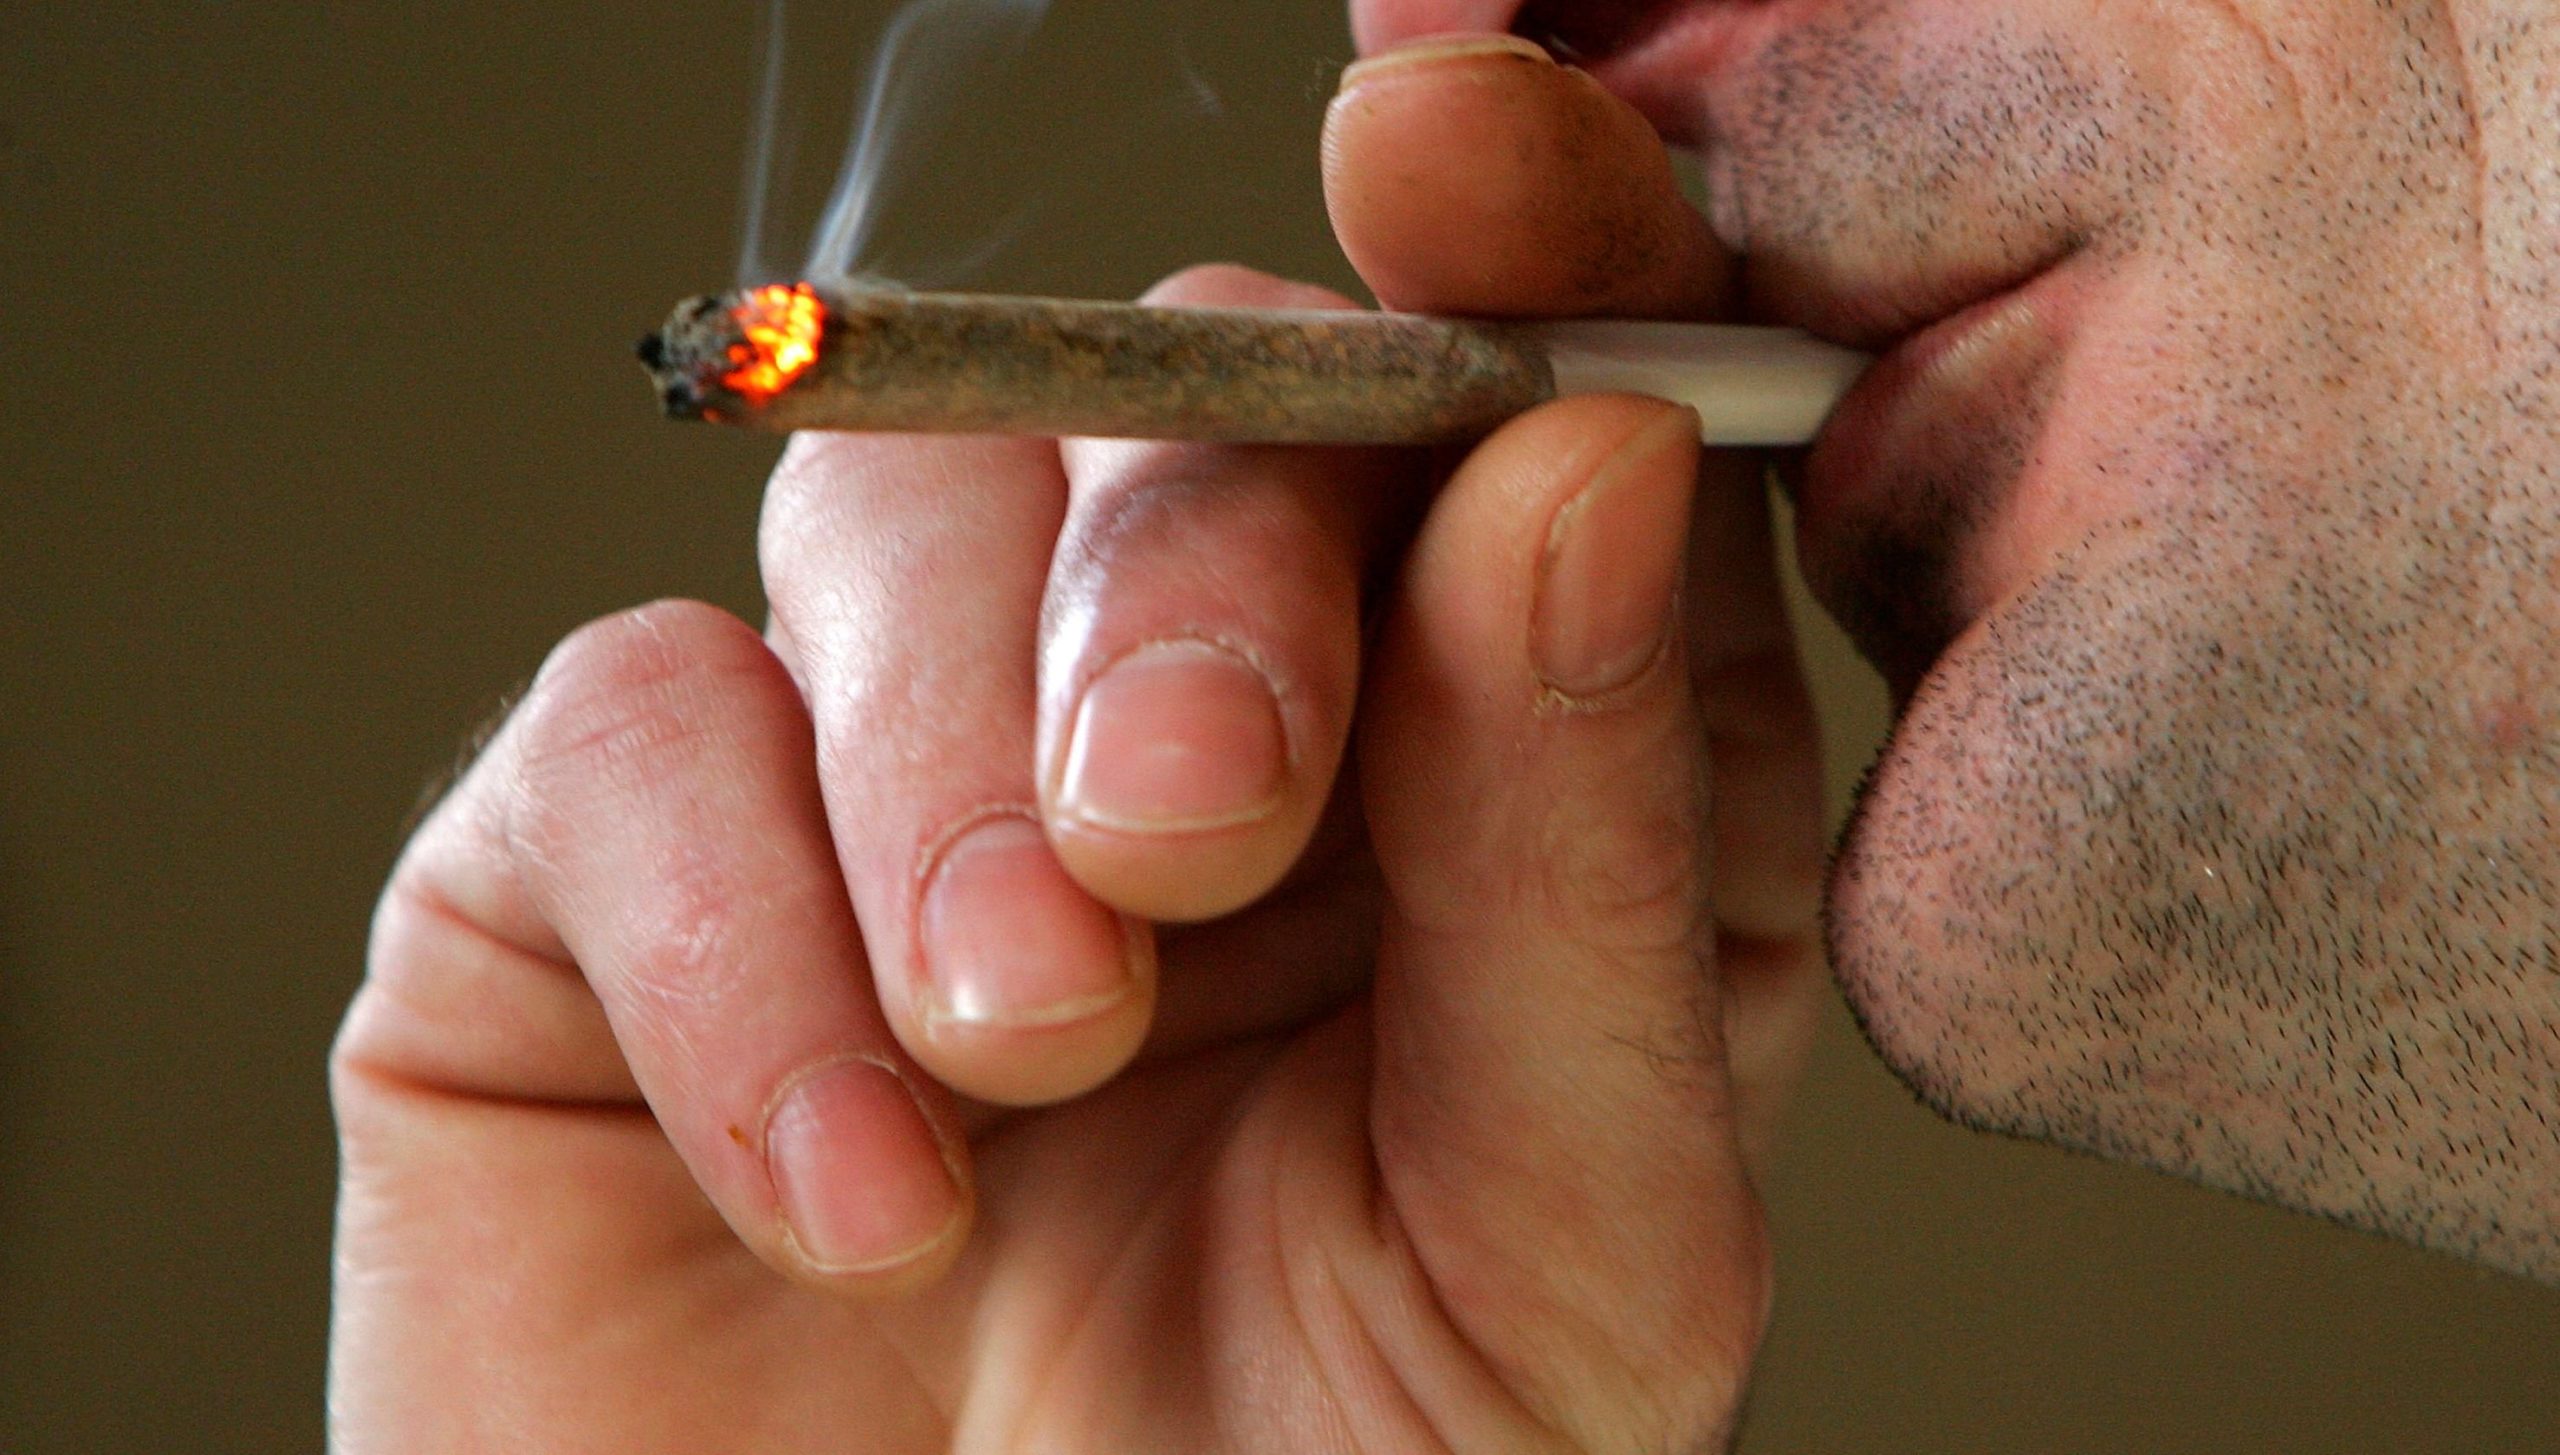 Now you can get weed delivered to you anywhere in California, even in cities that ban pot